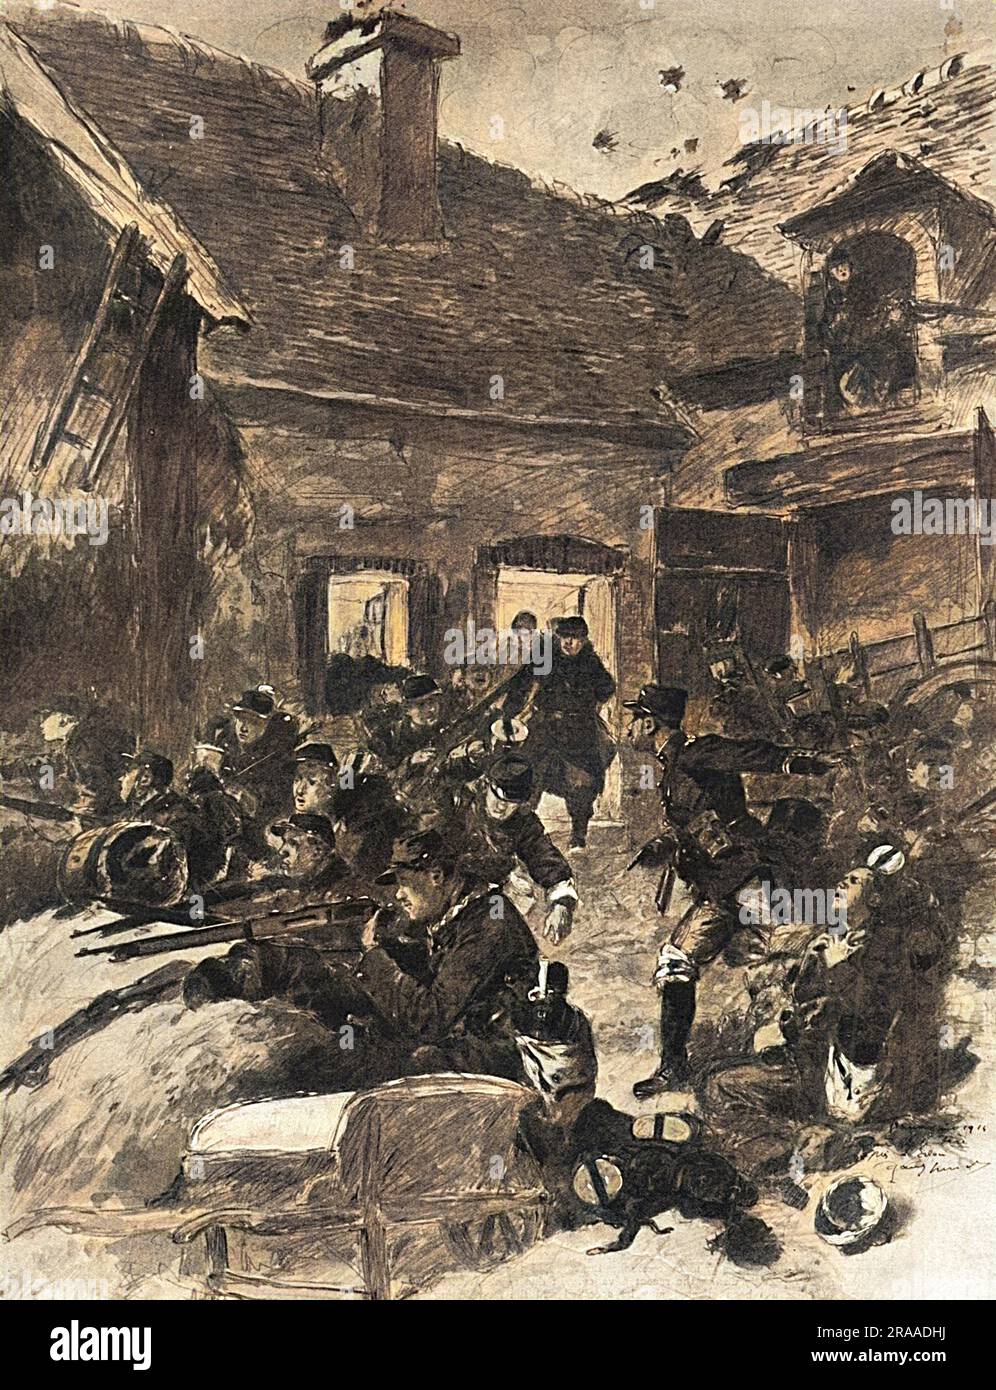 During the retreat of Allied troops towards Paris, French soldiers are awakened in the early hours by German bombardment of the cottage in La Fère where they had taken shelter. Hastily taking up positions, the French reply to the German fire for as long as possible until further retreat is unavoidable.     Date: Sep-14 Stock Photo